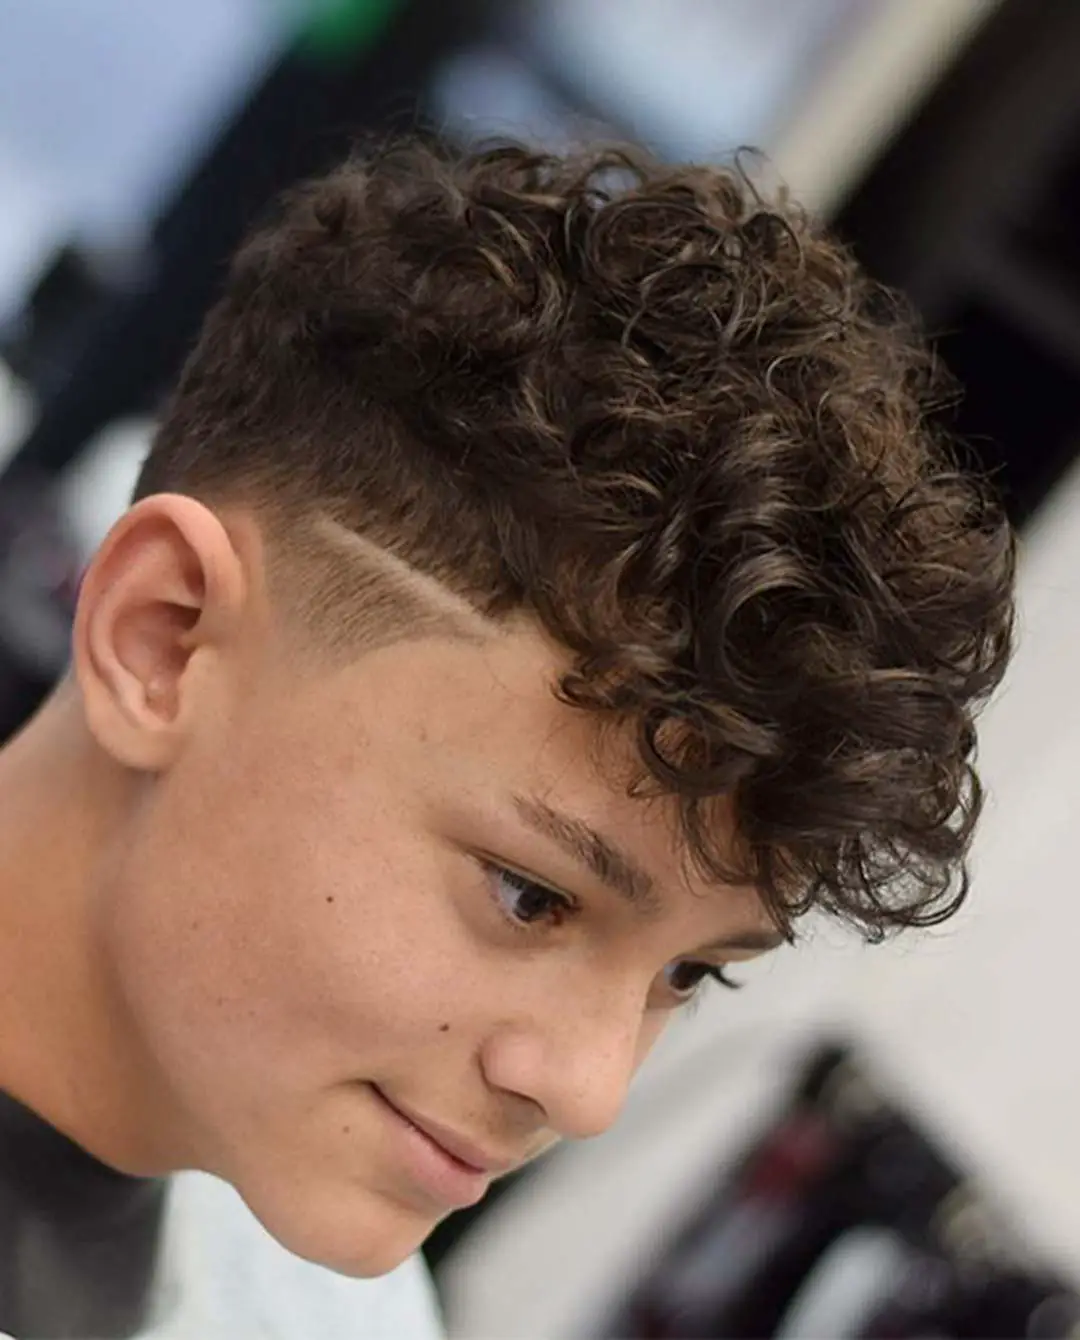 Curly Top with Low Fade